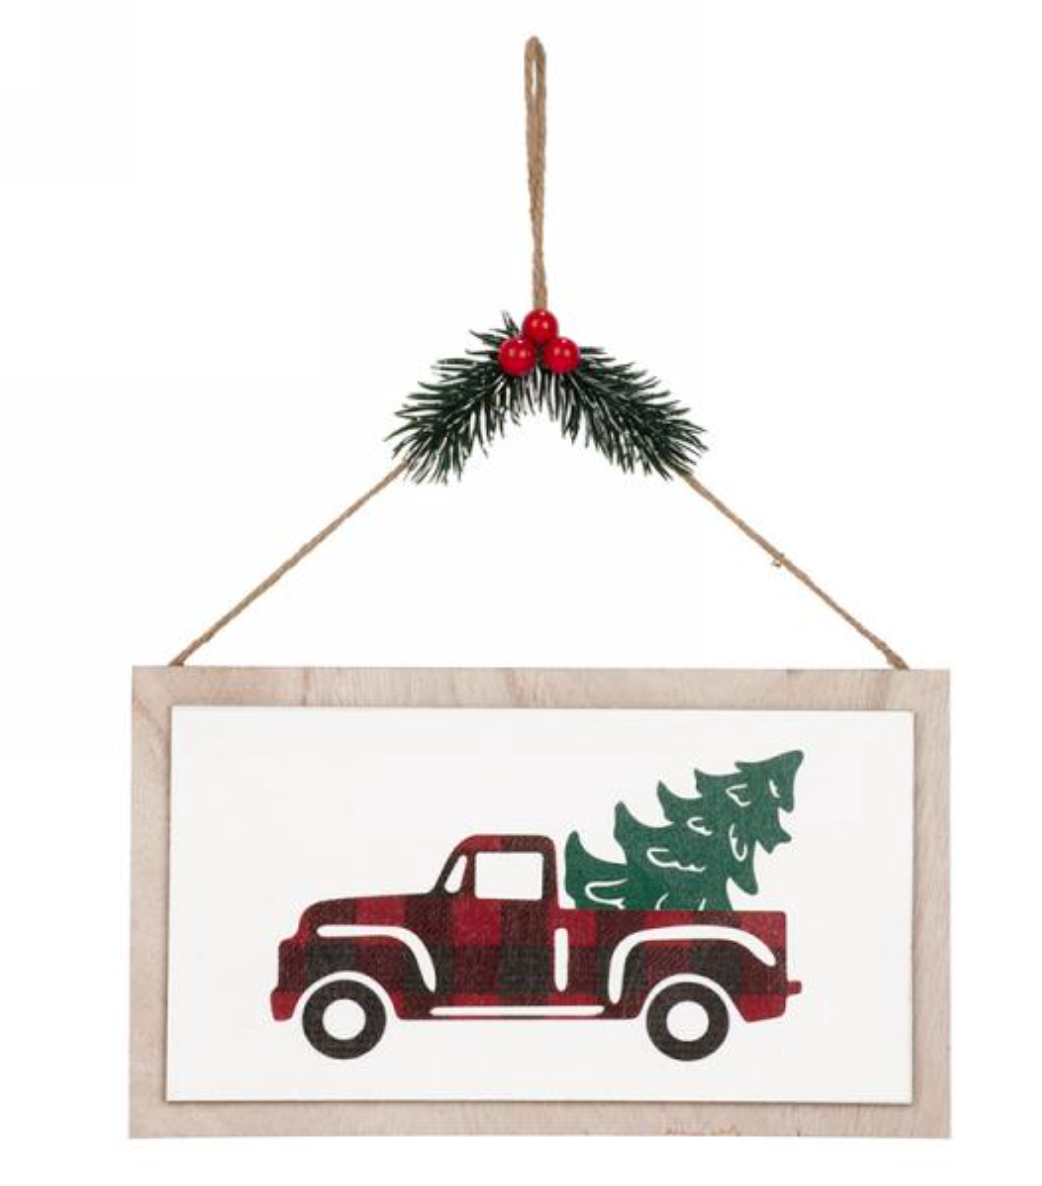 Hanging Plaque - red plaid truck